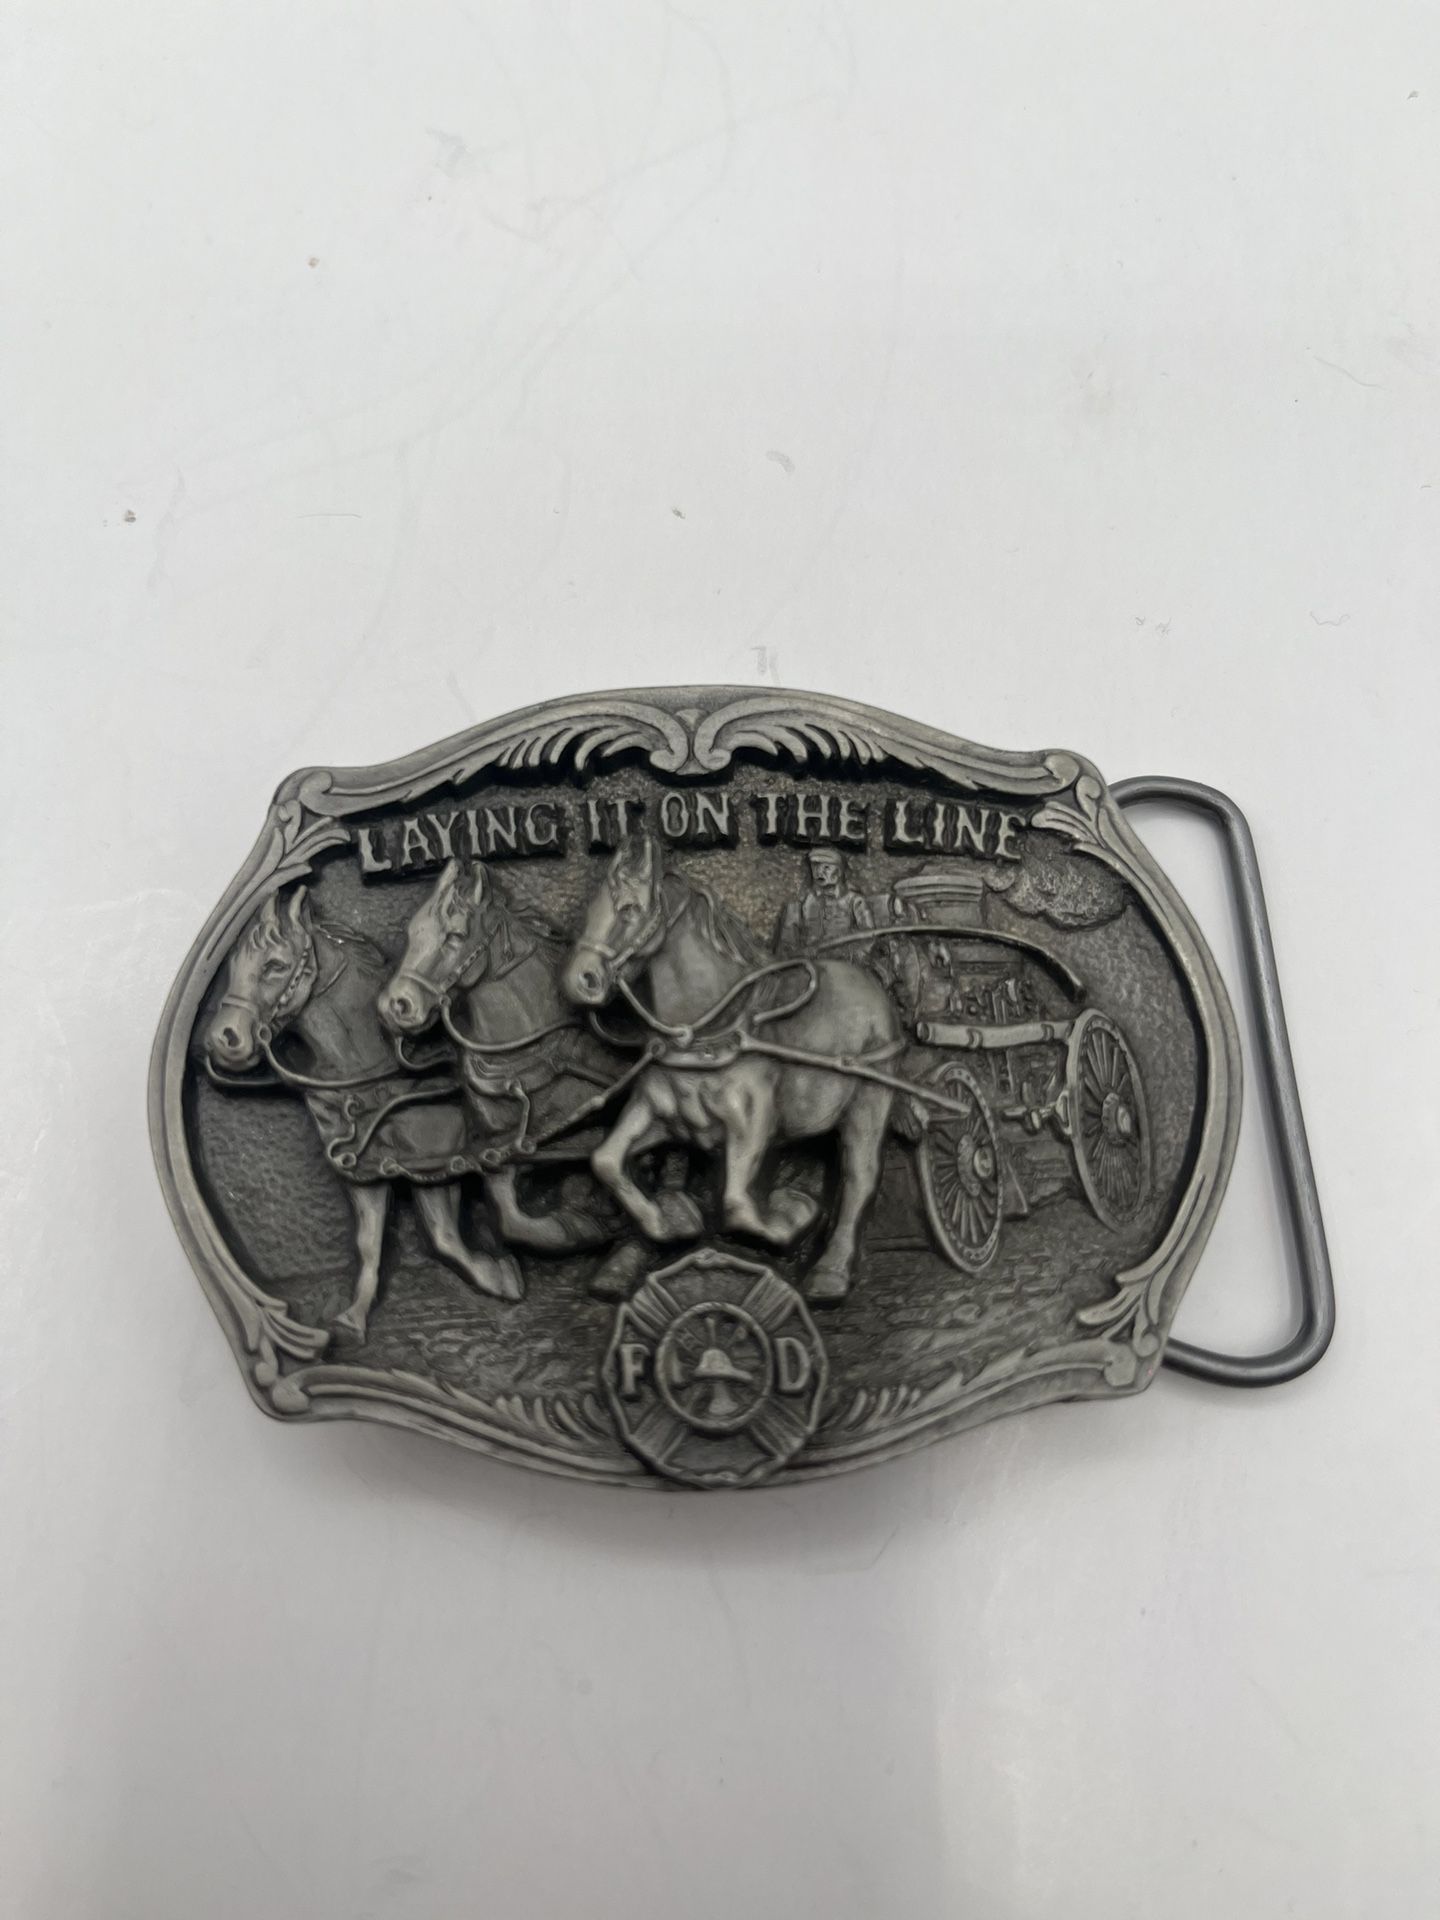 Laying It On The Line Solid Pewter Belt Buckle